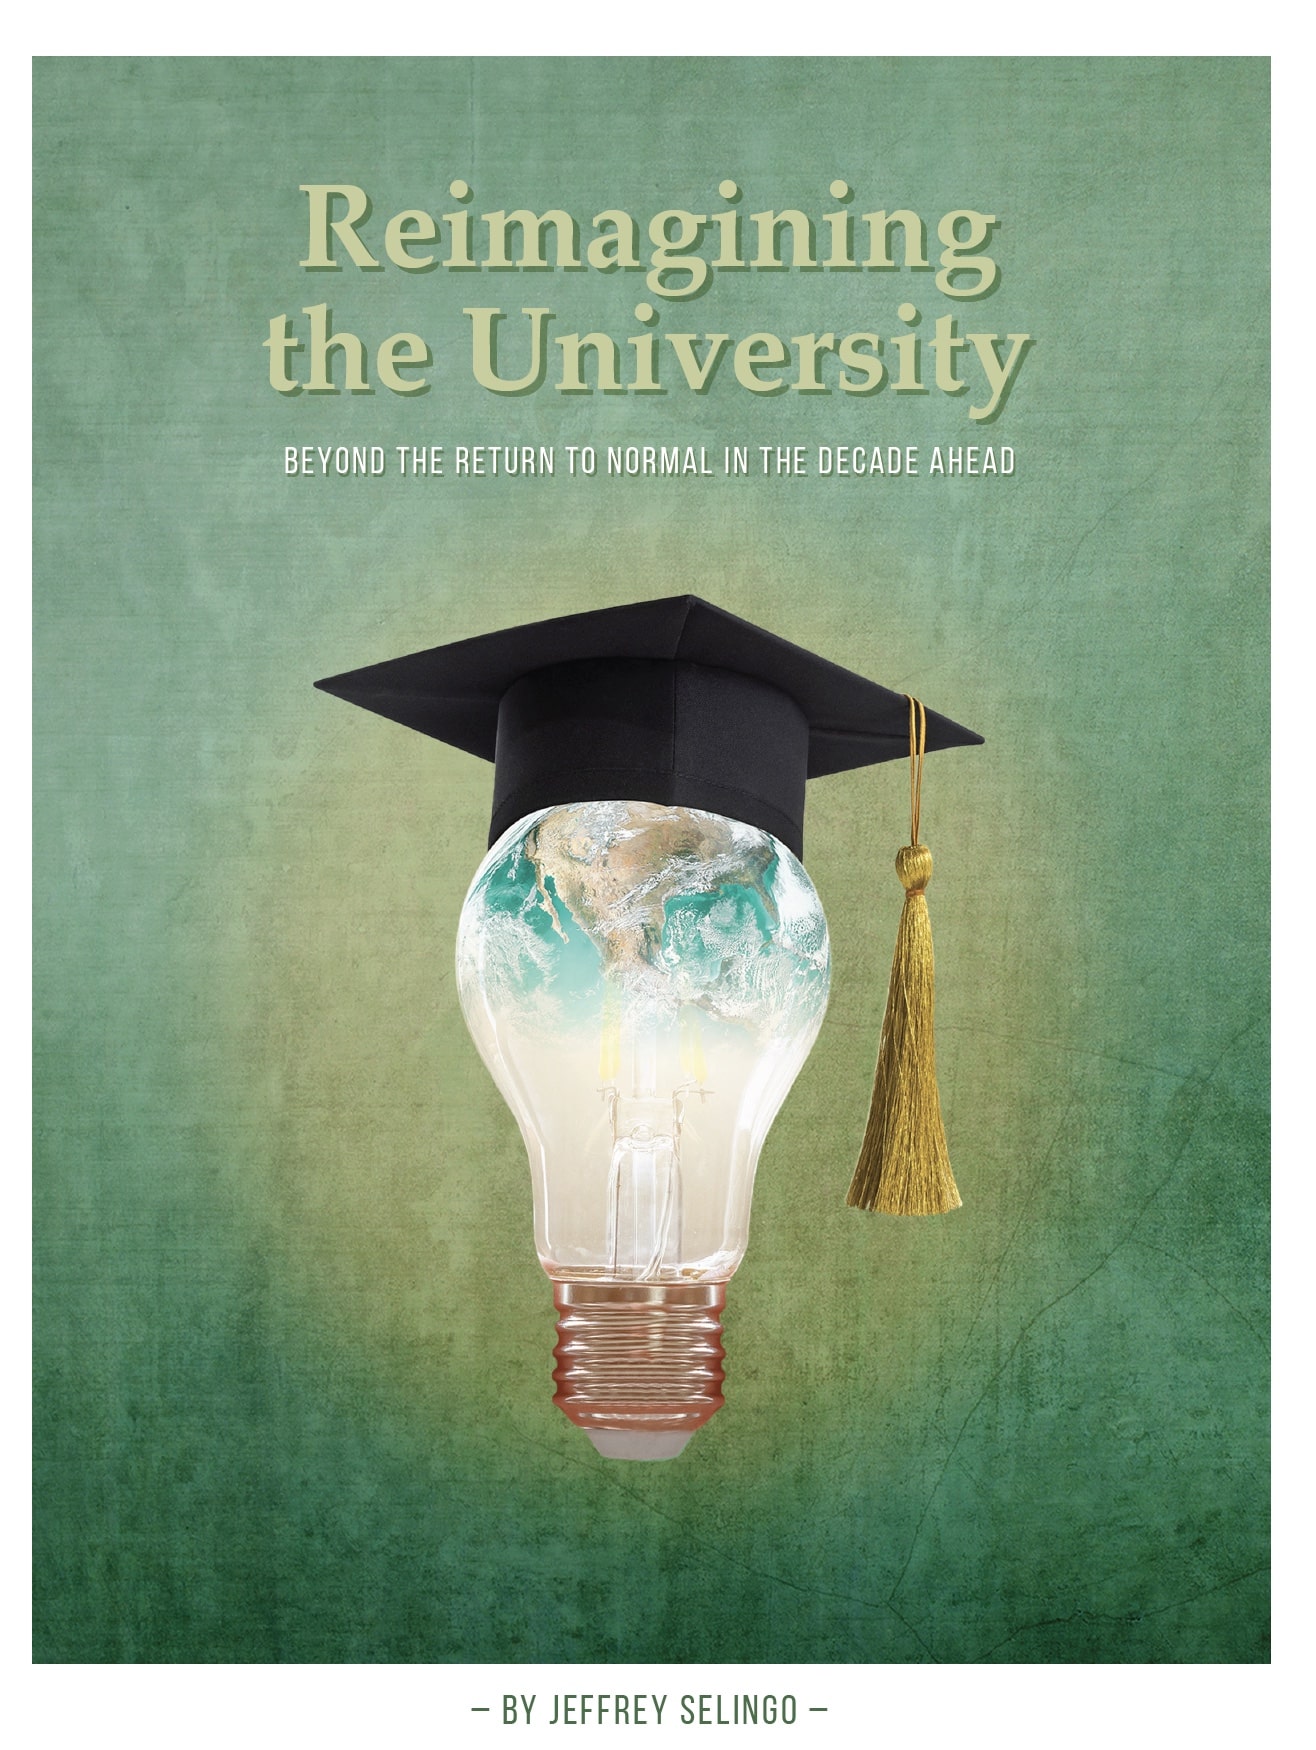 Reimgaining Cover featuring a lightbulb with a graduation cap sitting on top of the bulb